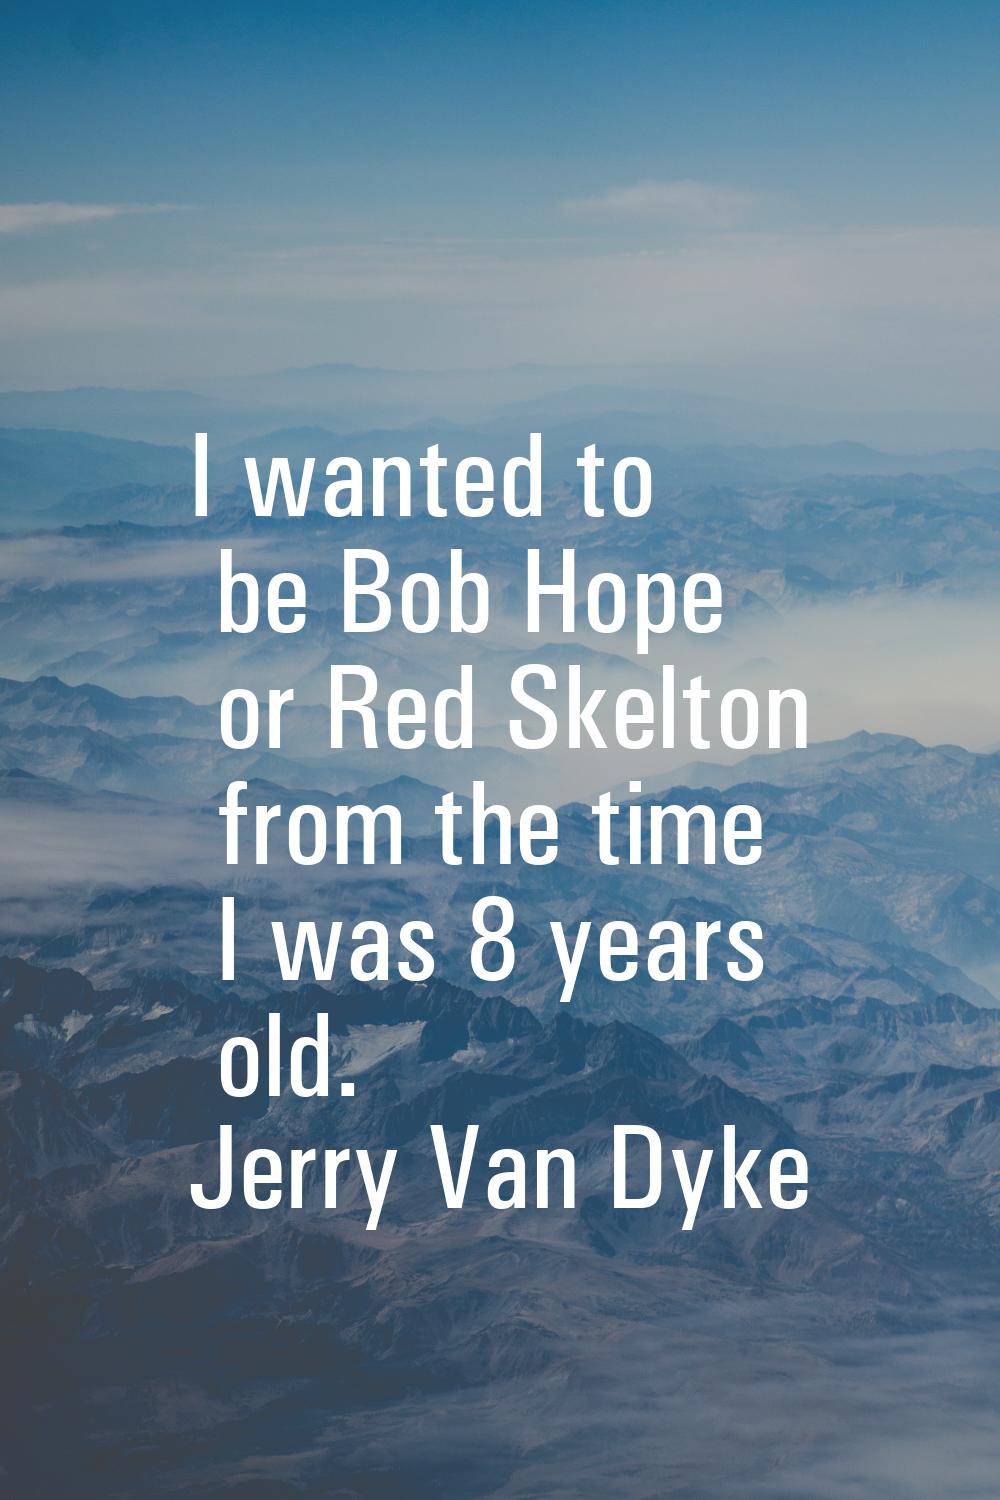 I wanted to be Bob Hope or Red Skelton from the time I was 8 years old.